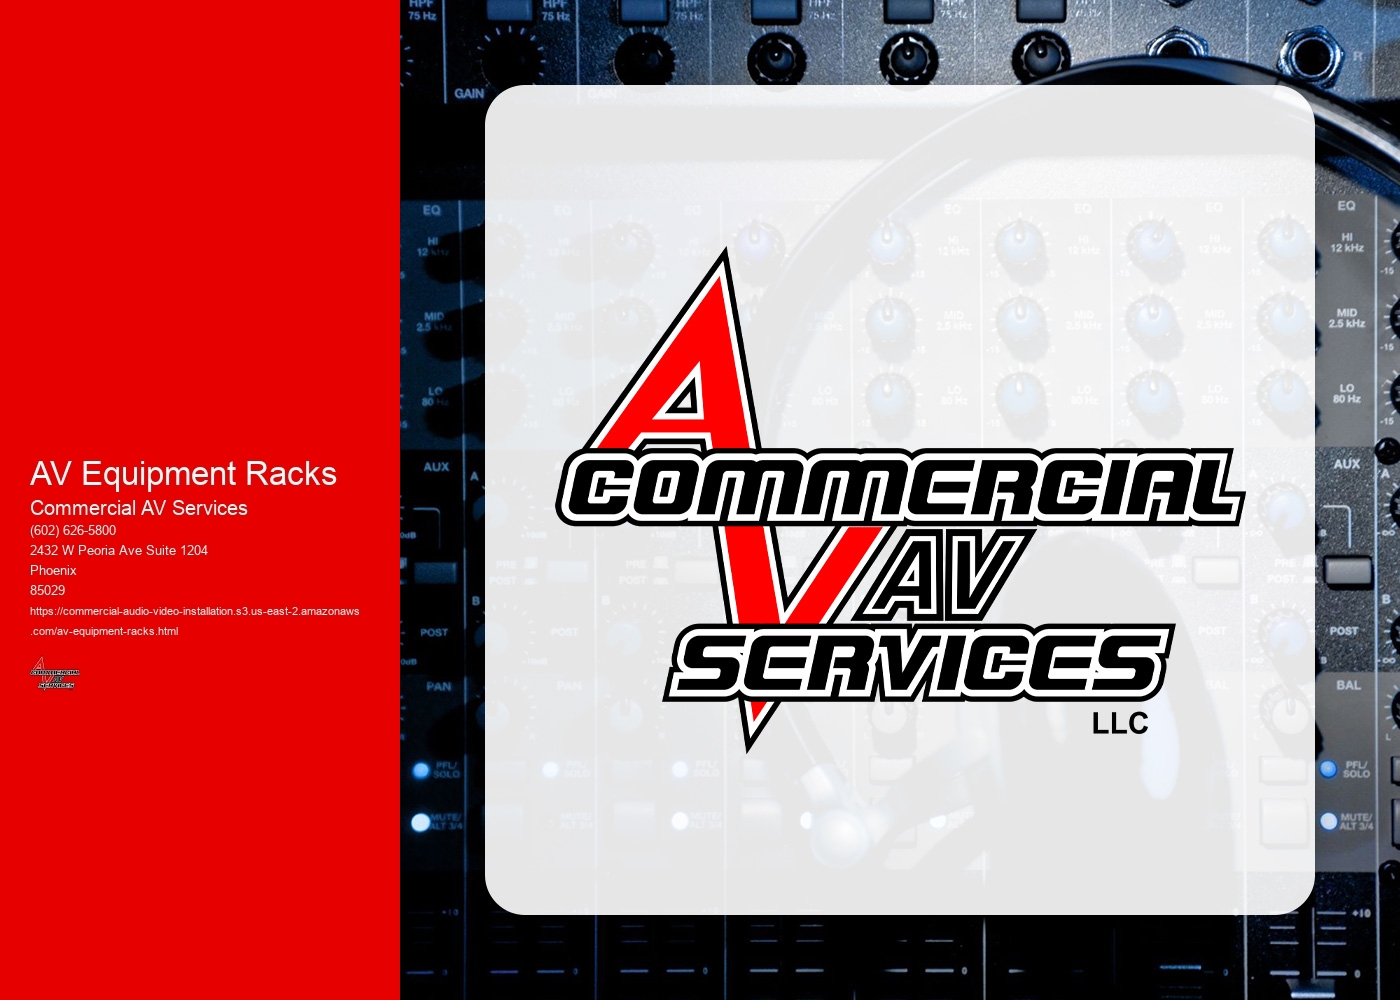 What are the key features to look for in an AV equipment rack, such as cable management and ventilation?